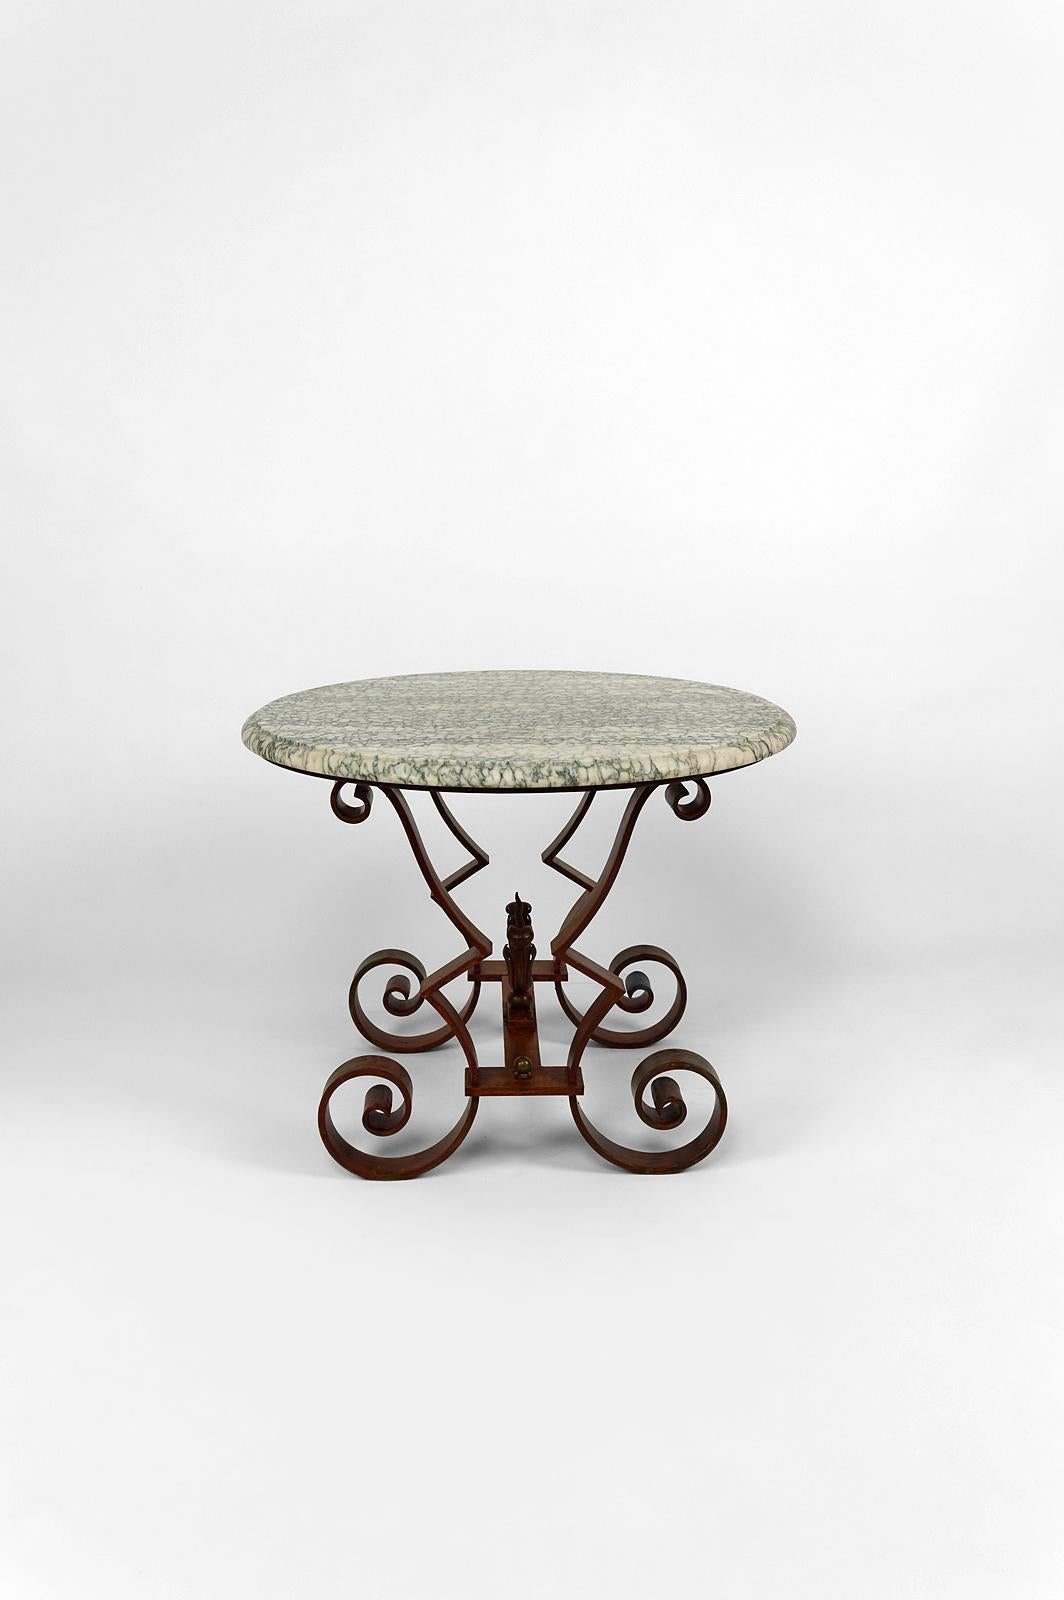 Circular Art Deco Pedestal Table in Marble and Wrought Iron, France, circa 1940 For Sale 13